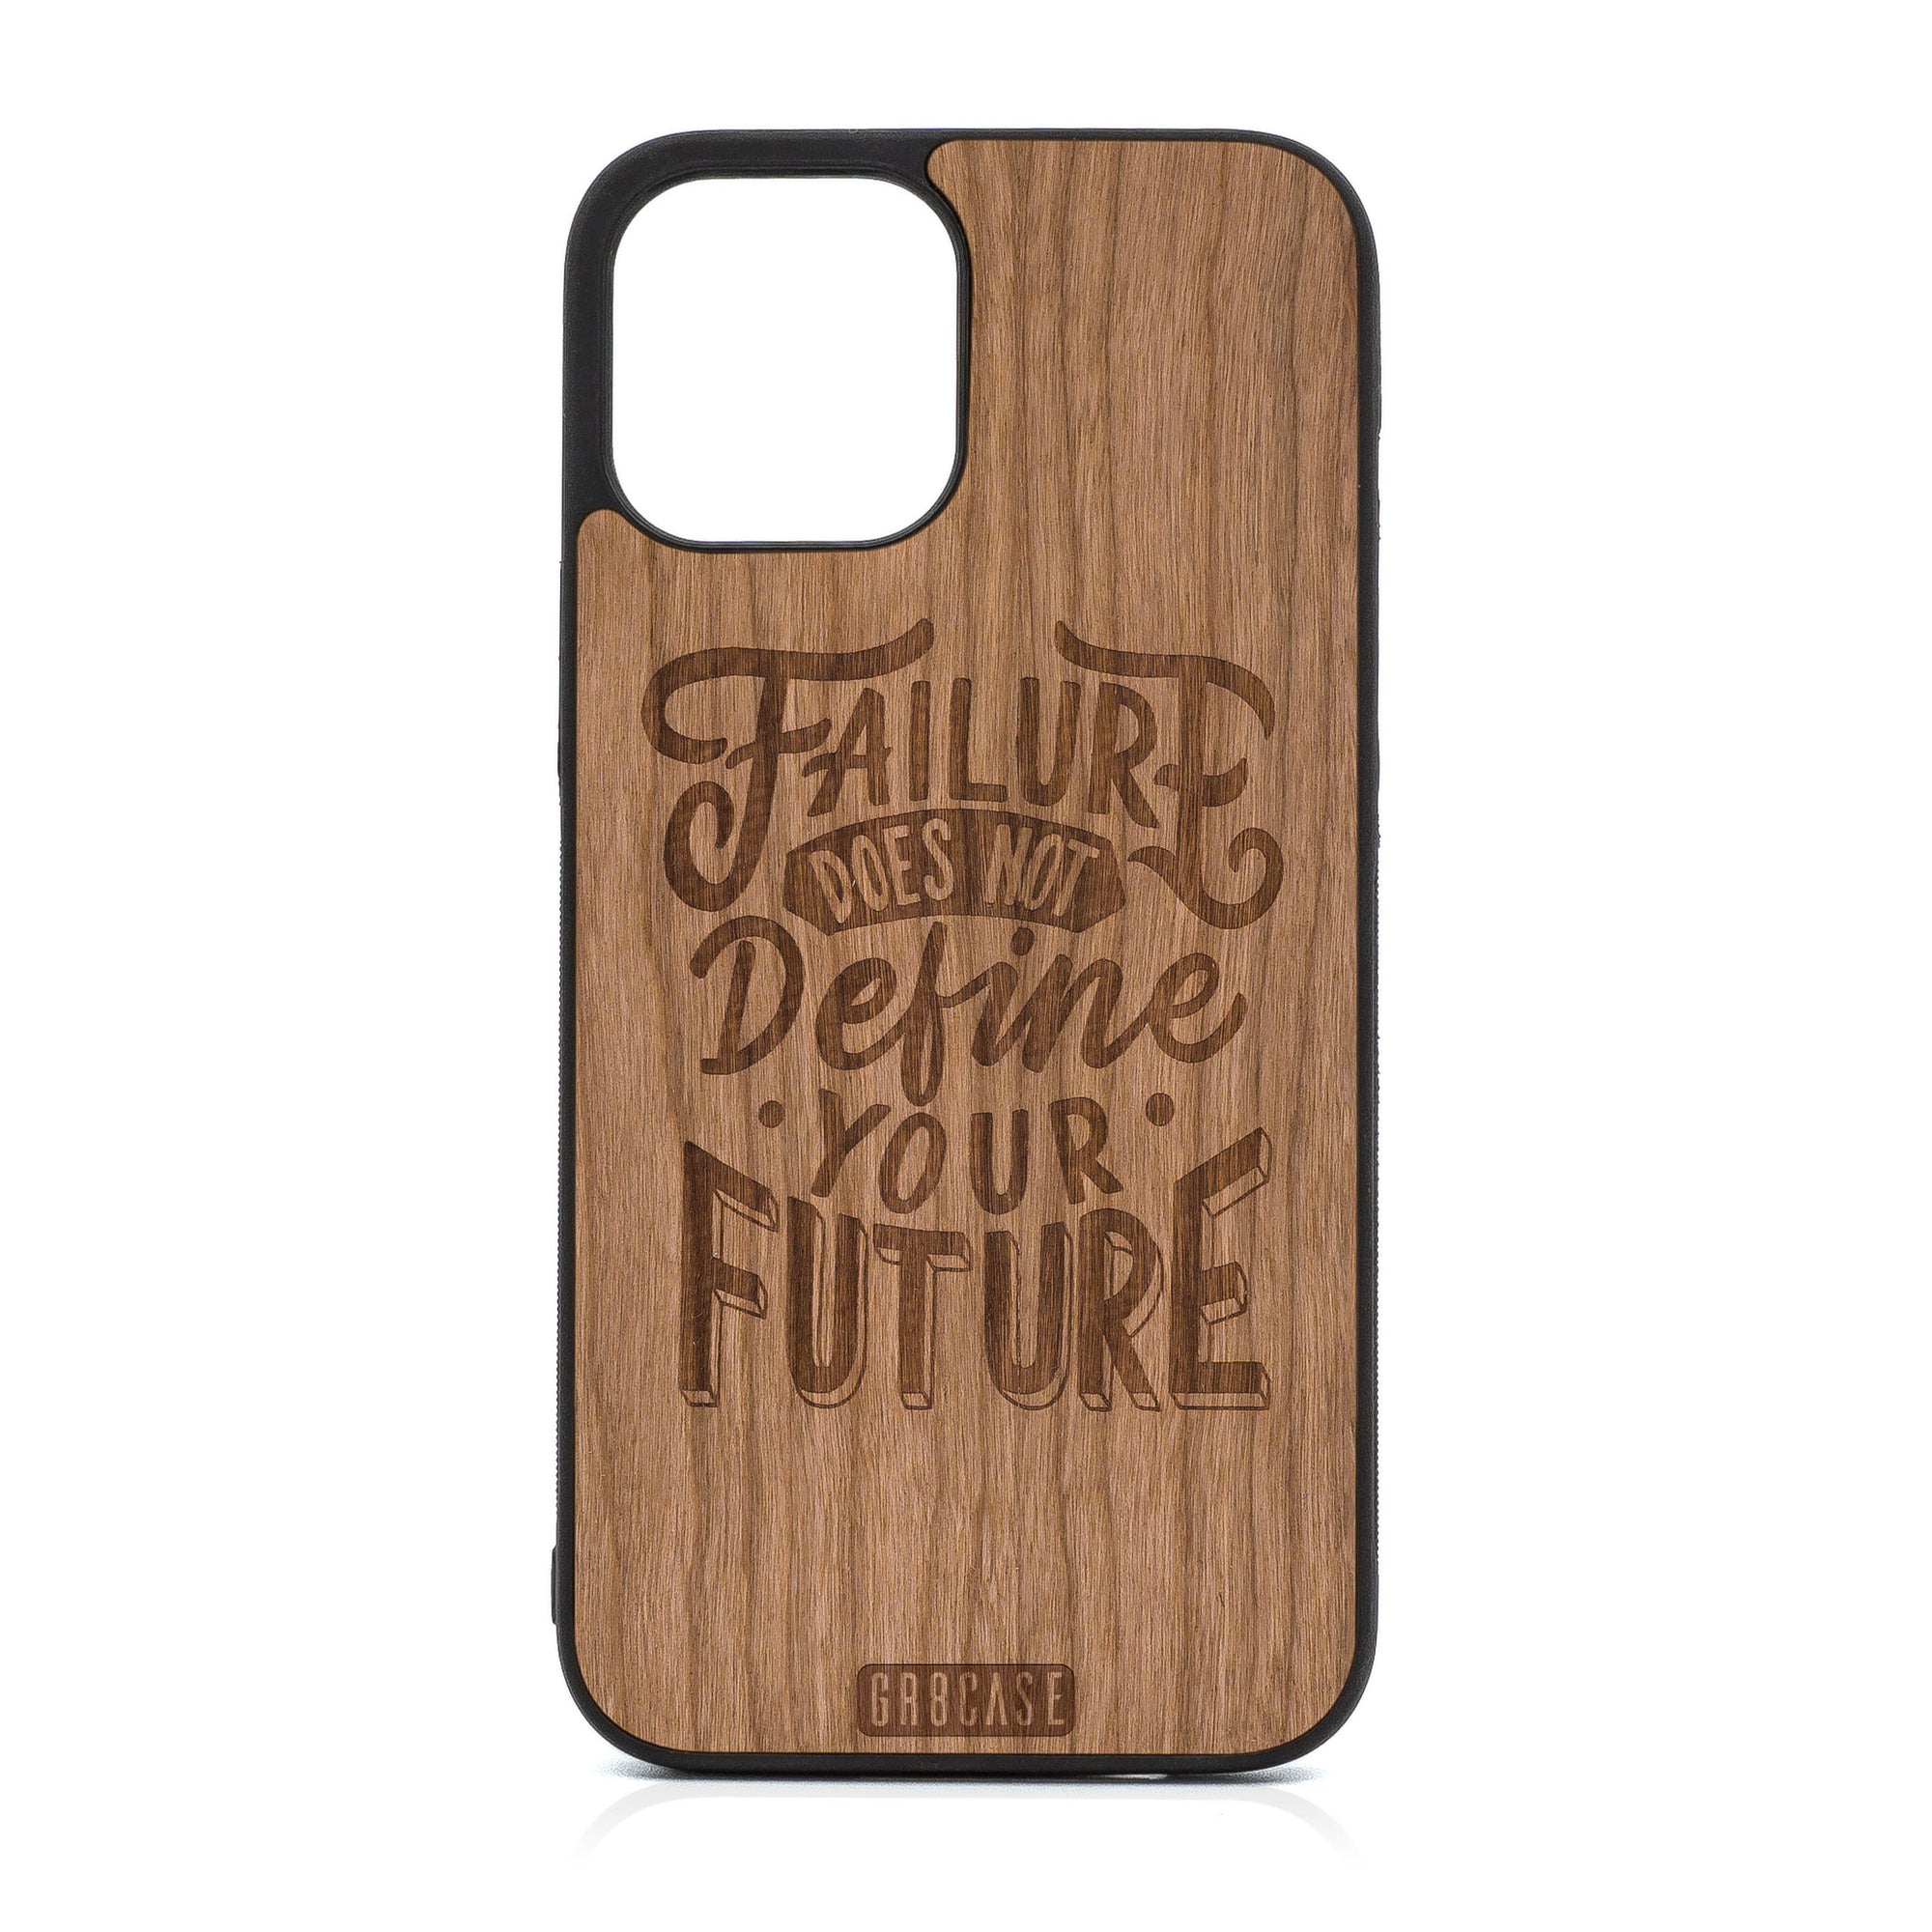 Failure Does Not Define Your Future Design Wood Case For iPhone 12 Pro Max